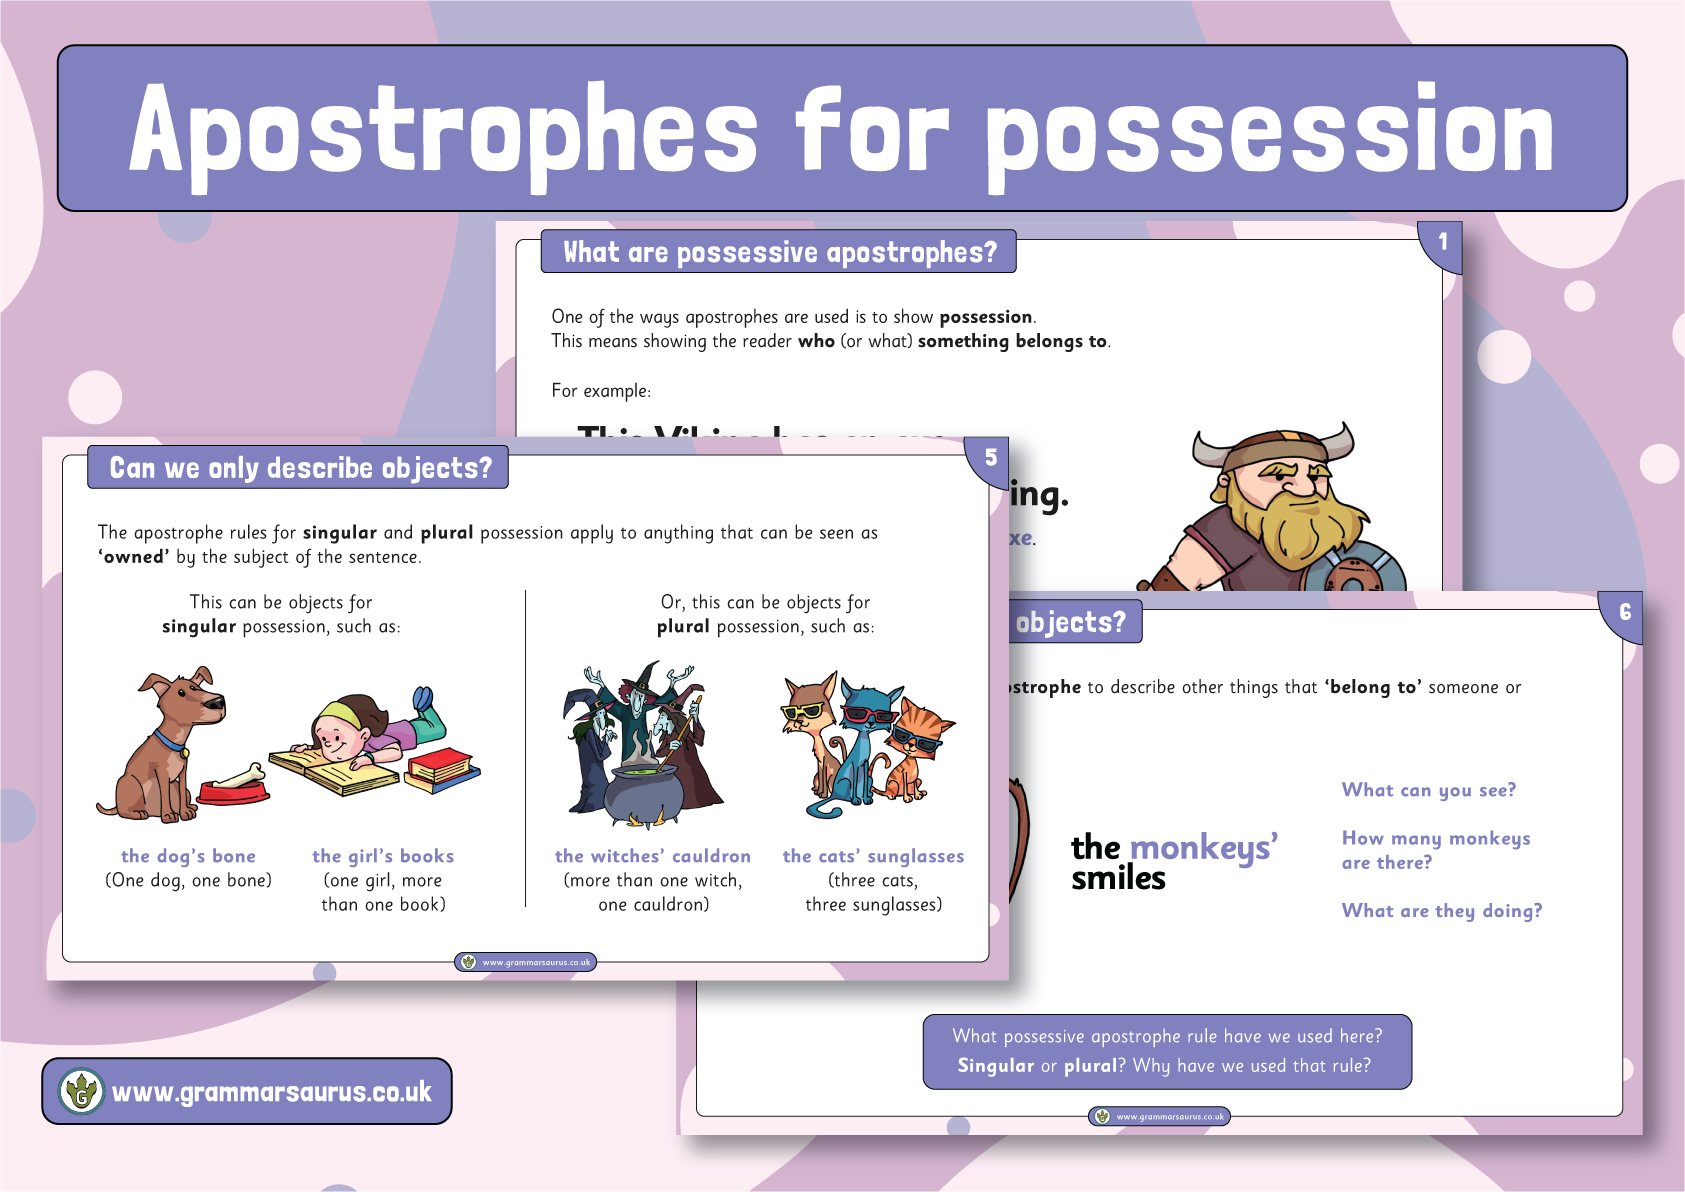 apostrophe-rules-easy-guide-to-different-uses-yourdictionary